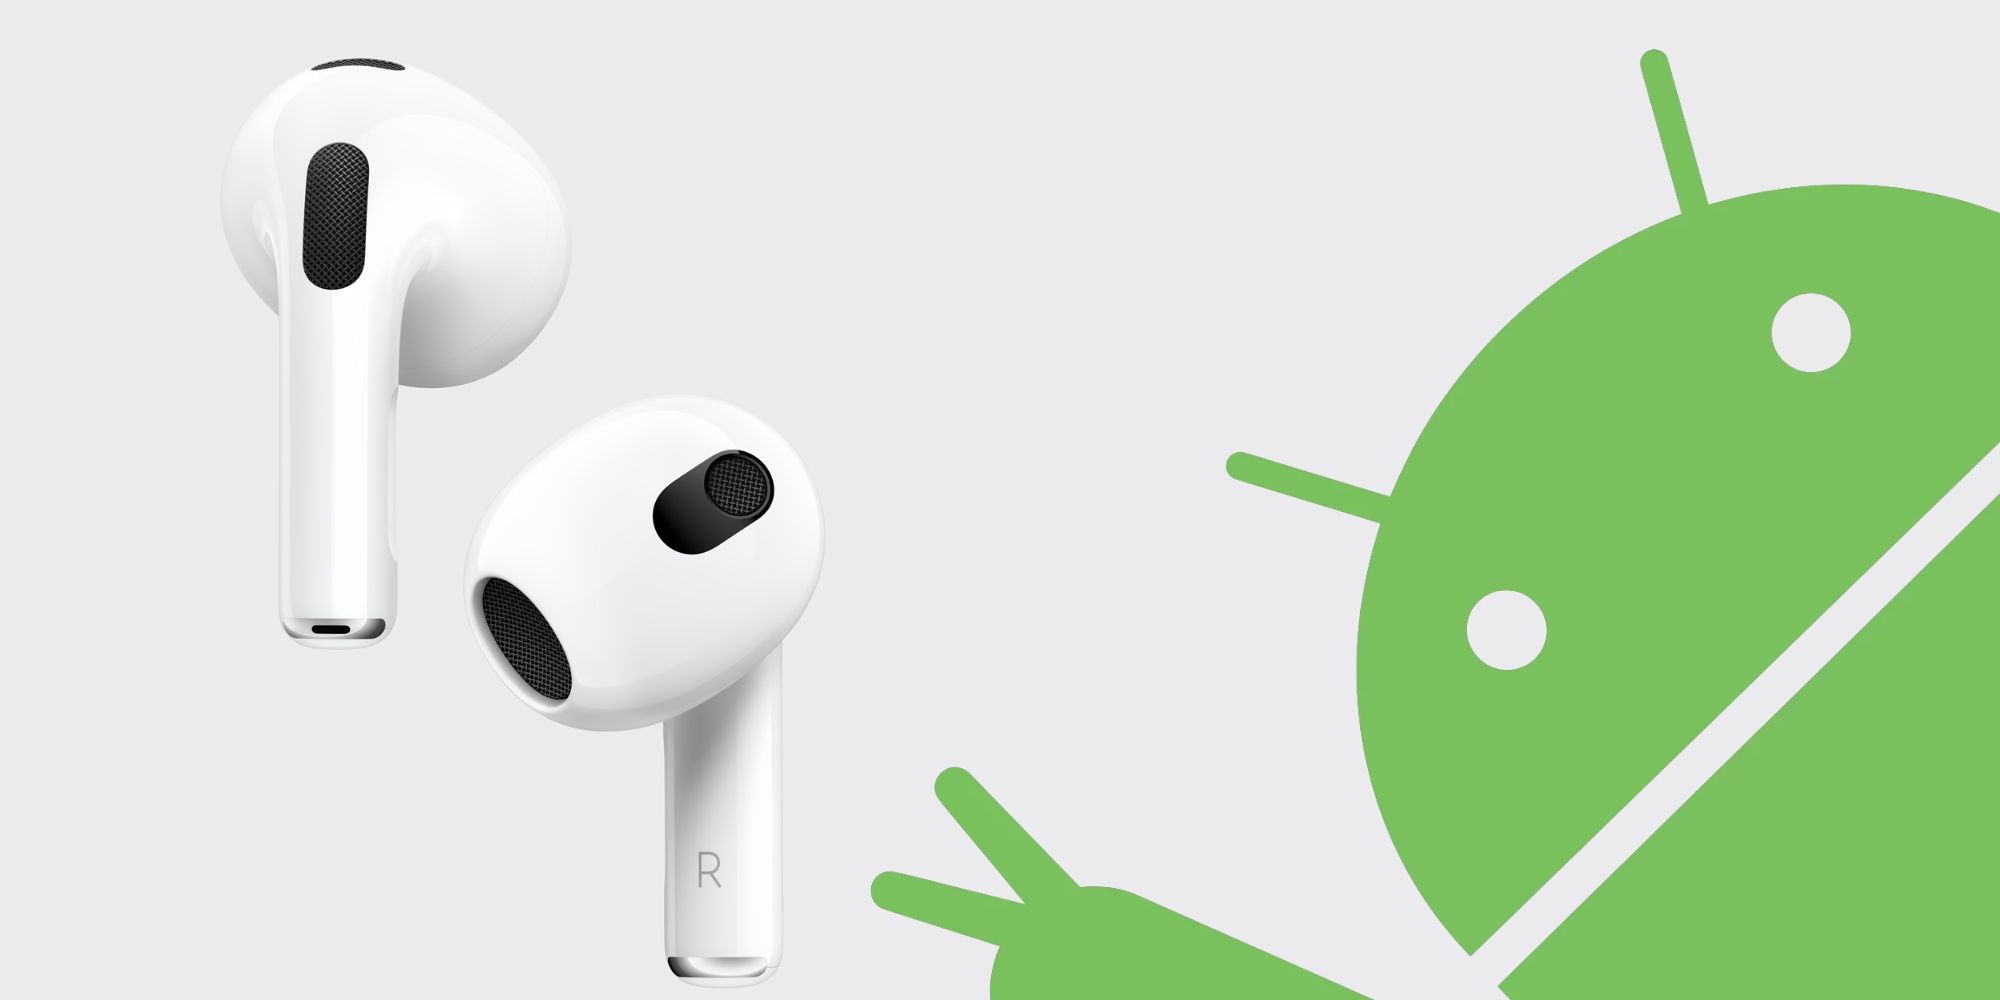 Grisling Lavet af underkjole Do AirPods 3 Work With Android? What You Have To Know About The Earbuds